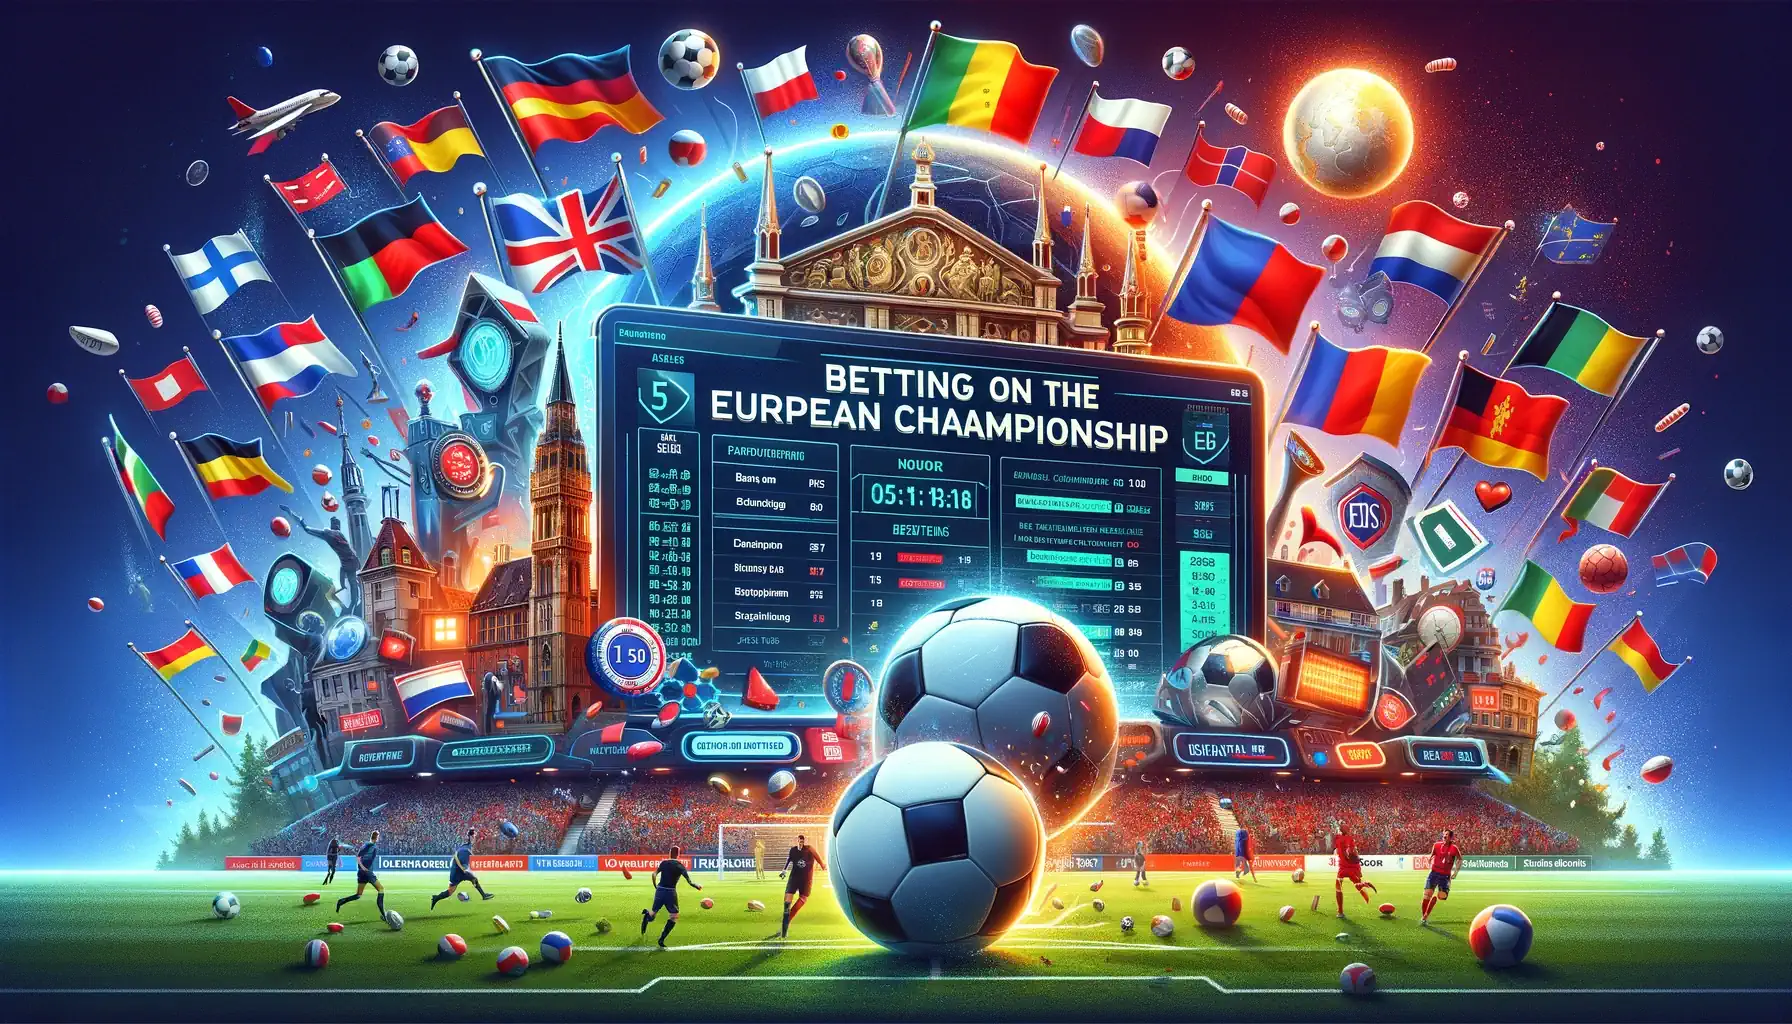 Guide to Betting on the European Championship